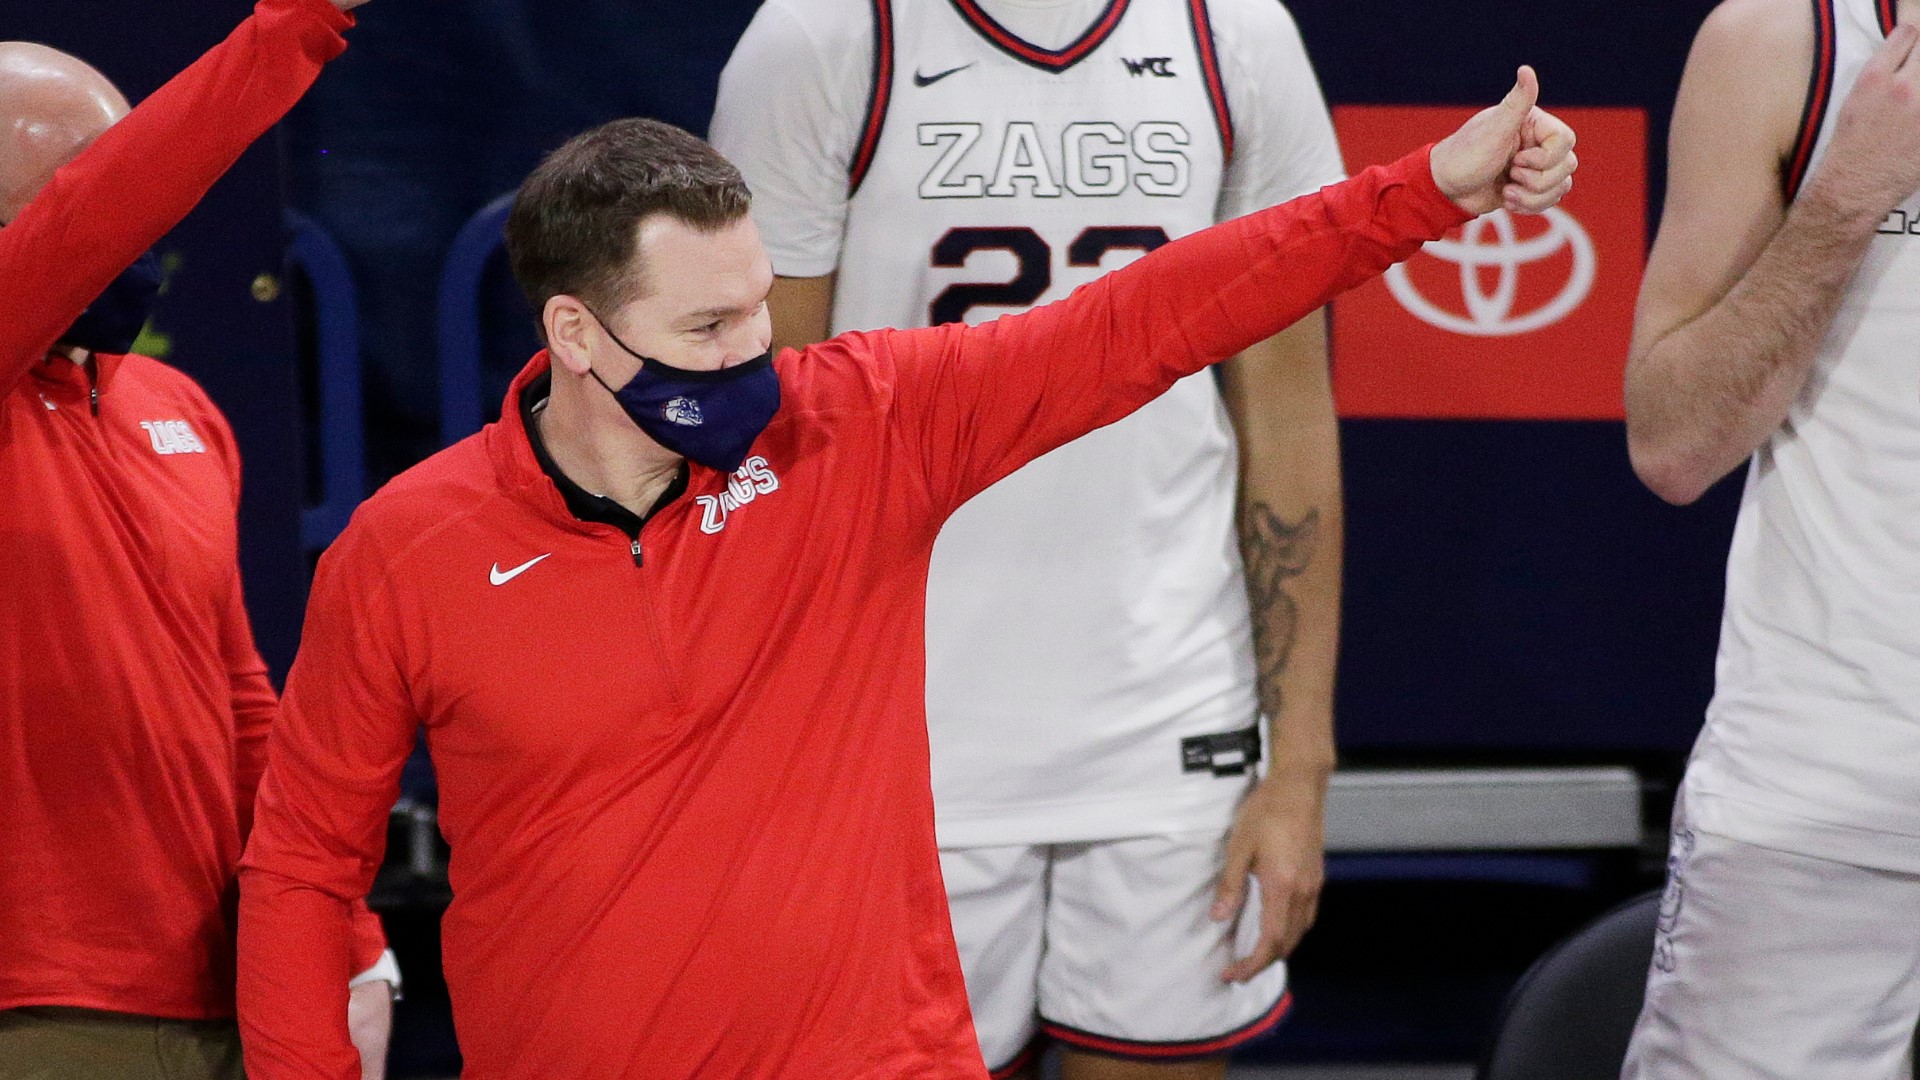 Lloyd has been around Gonzaga's program for over 20 years. Now he gets his turn to lead his own ship.